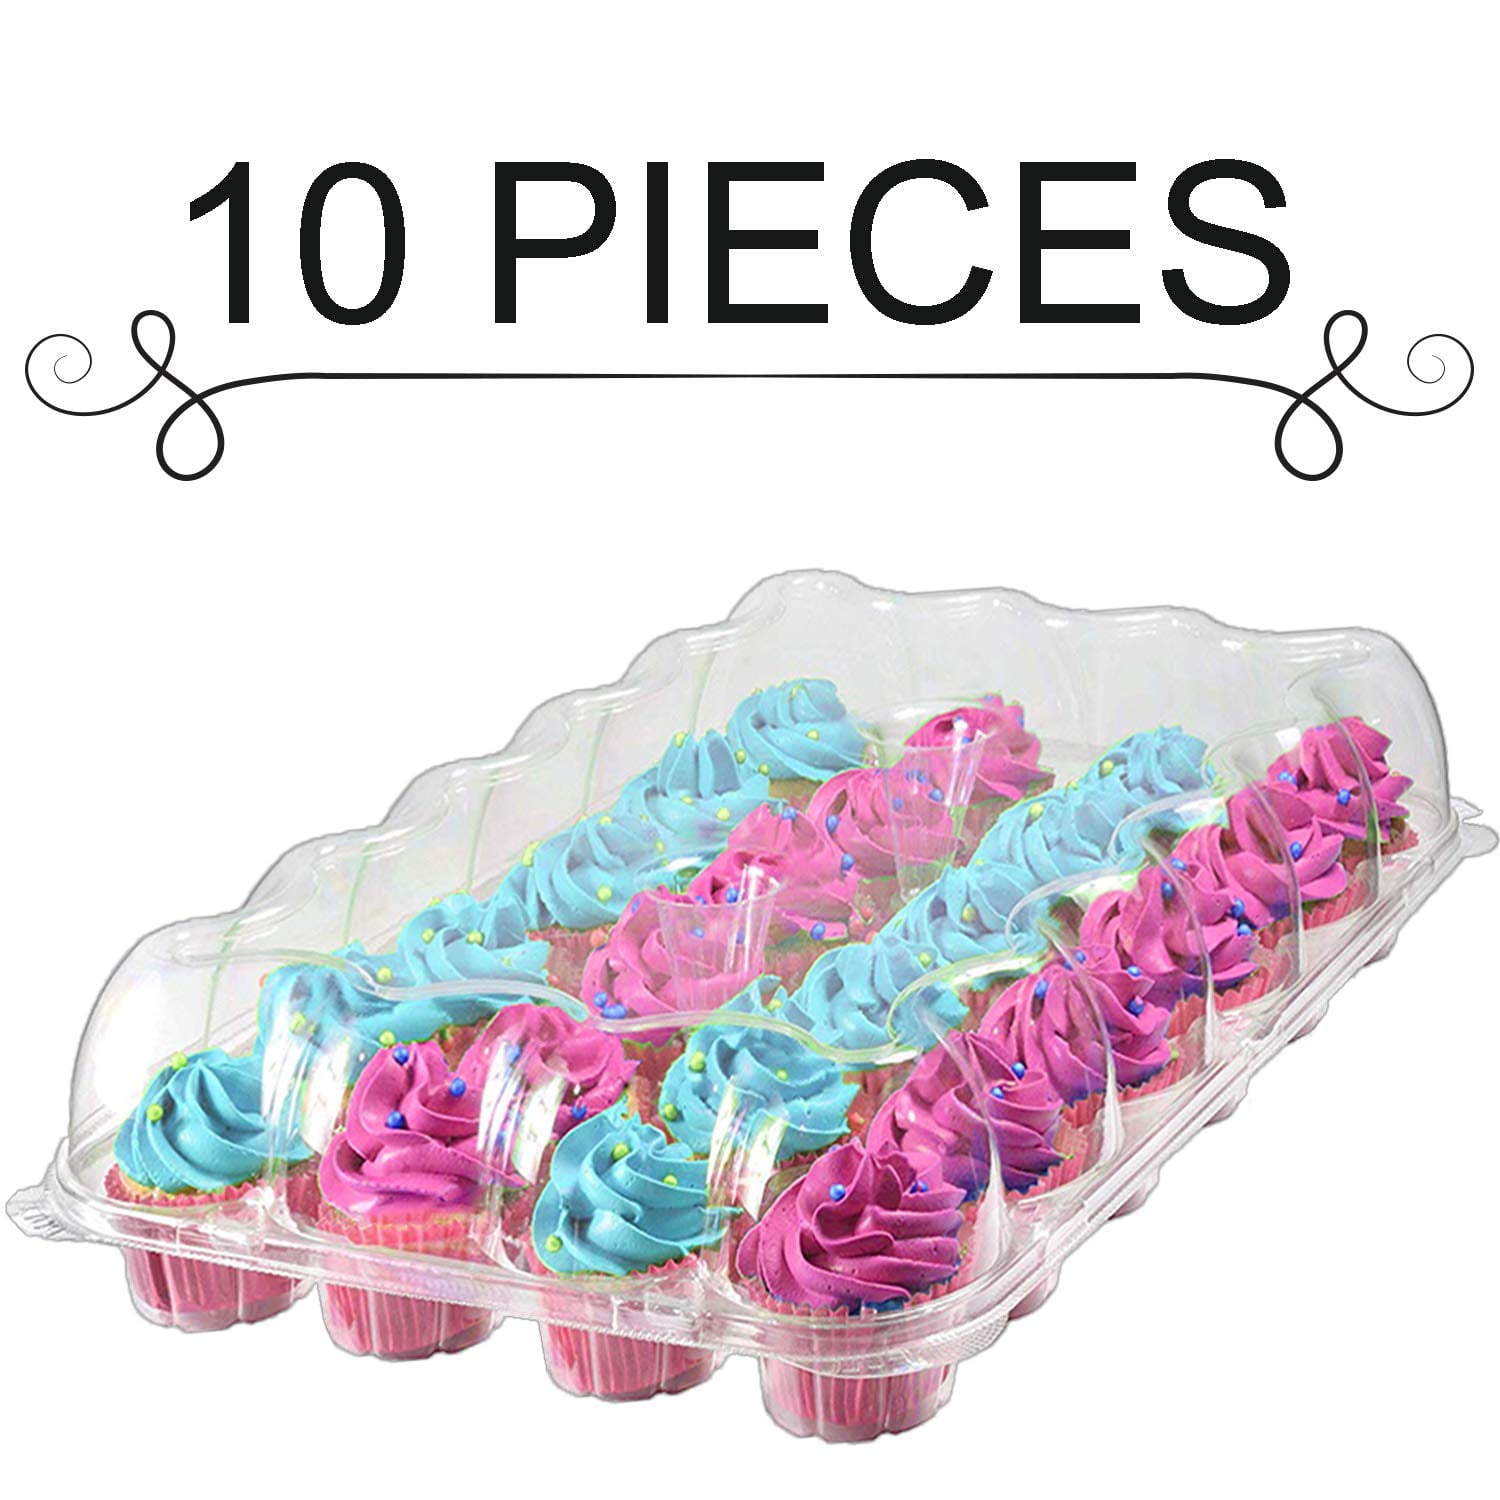 Large Storage tray BAKERYBEST Cupcake Boxes Disposable Plastic Containers Holder 24 Count 10 Pack Carrier Bulk Transport Cupcakes Cupcakeboxes Muffin Tray Clear Container Box Holders Tall Dome